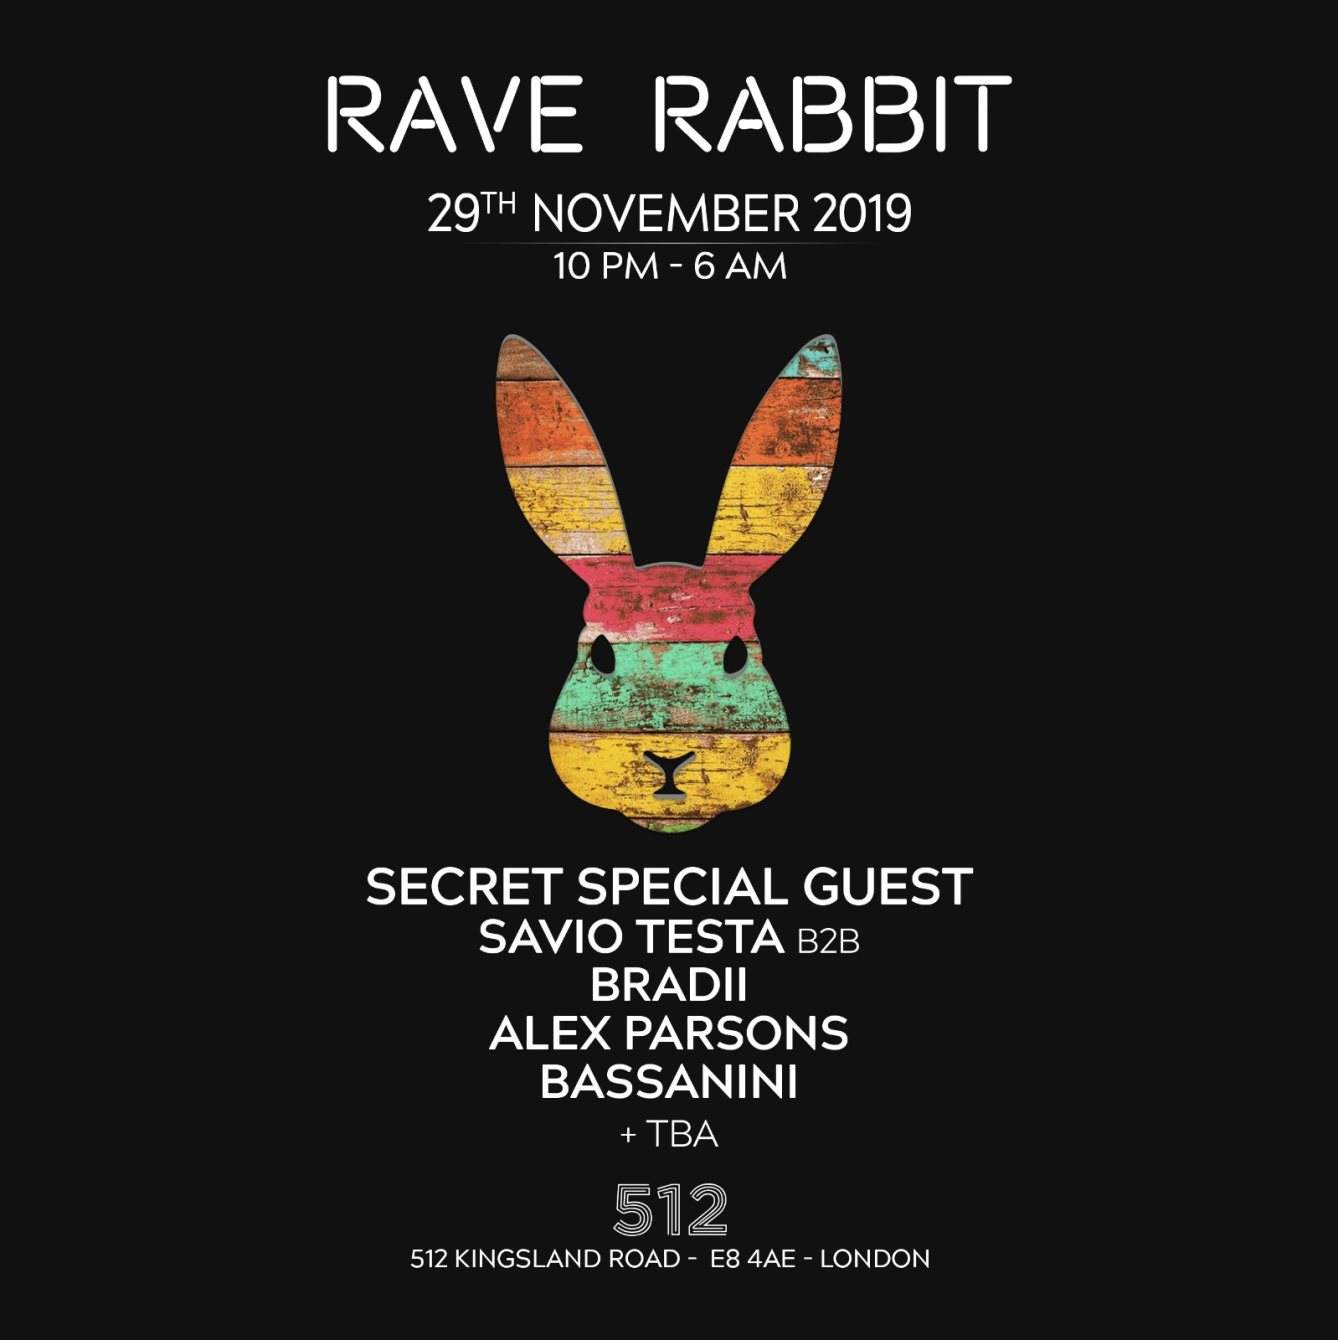 Rave Rabbit with Savio Testa, Secret Special Guest and More - フライヤー裏